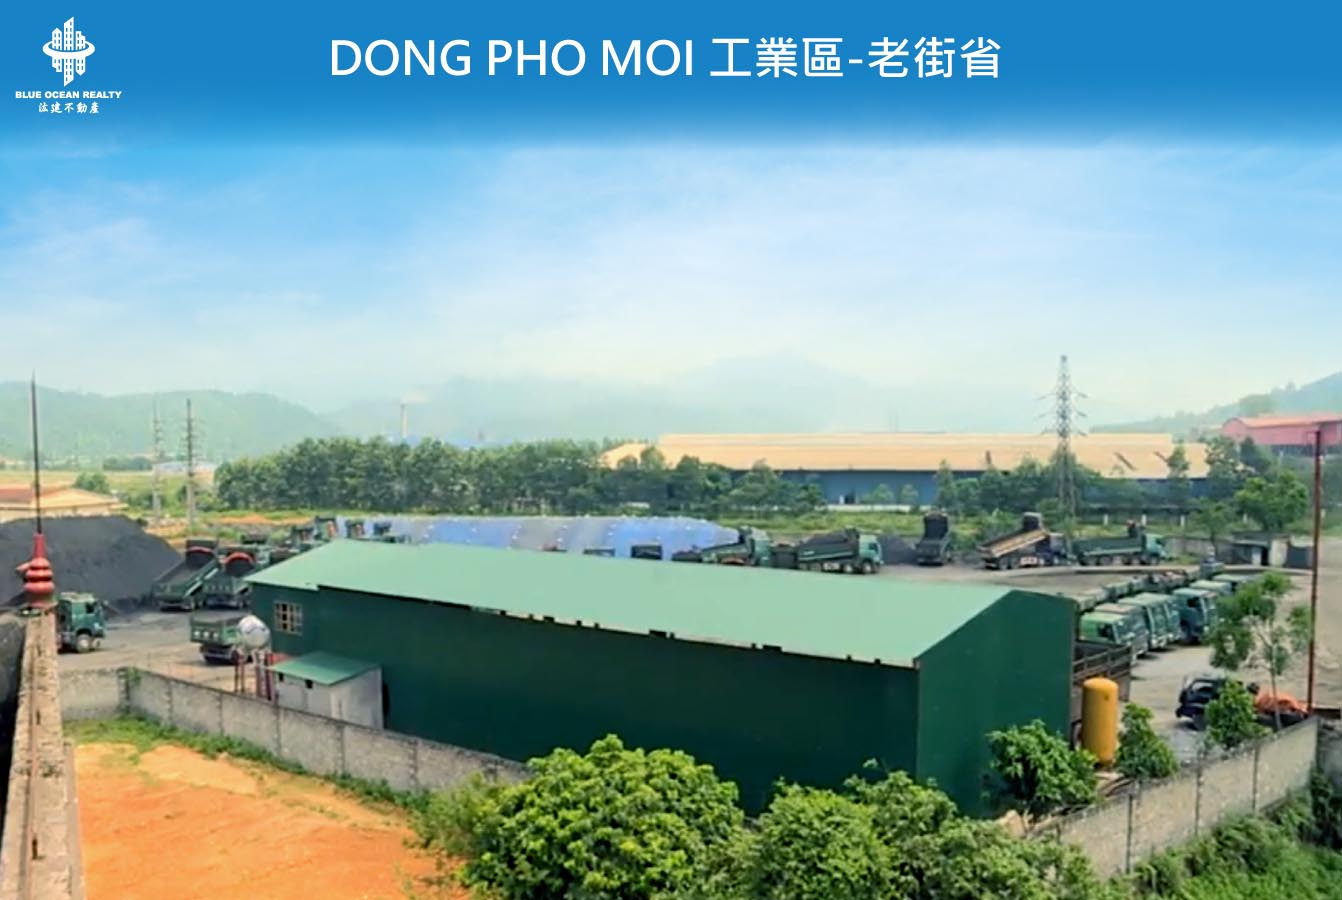 dong-pho-moi-工業區-老街省-2